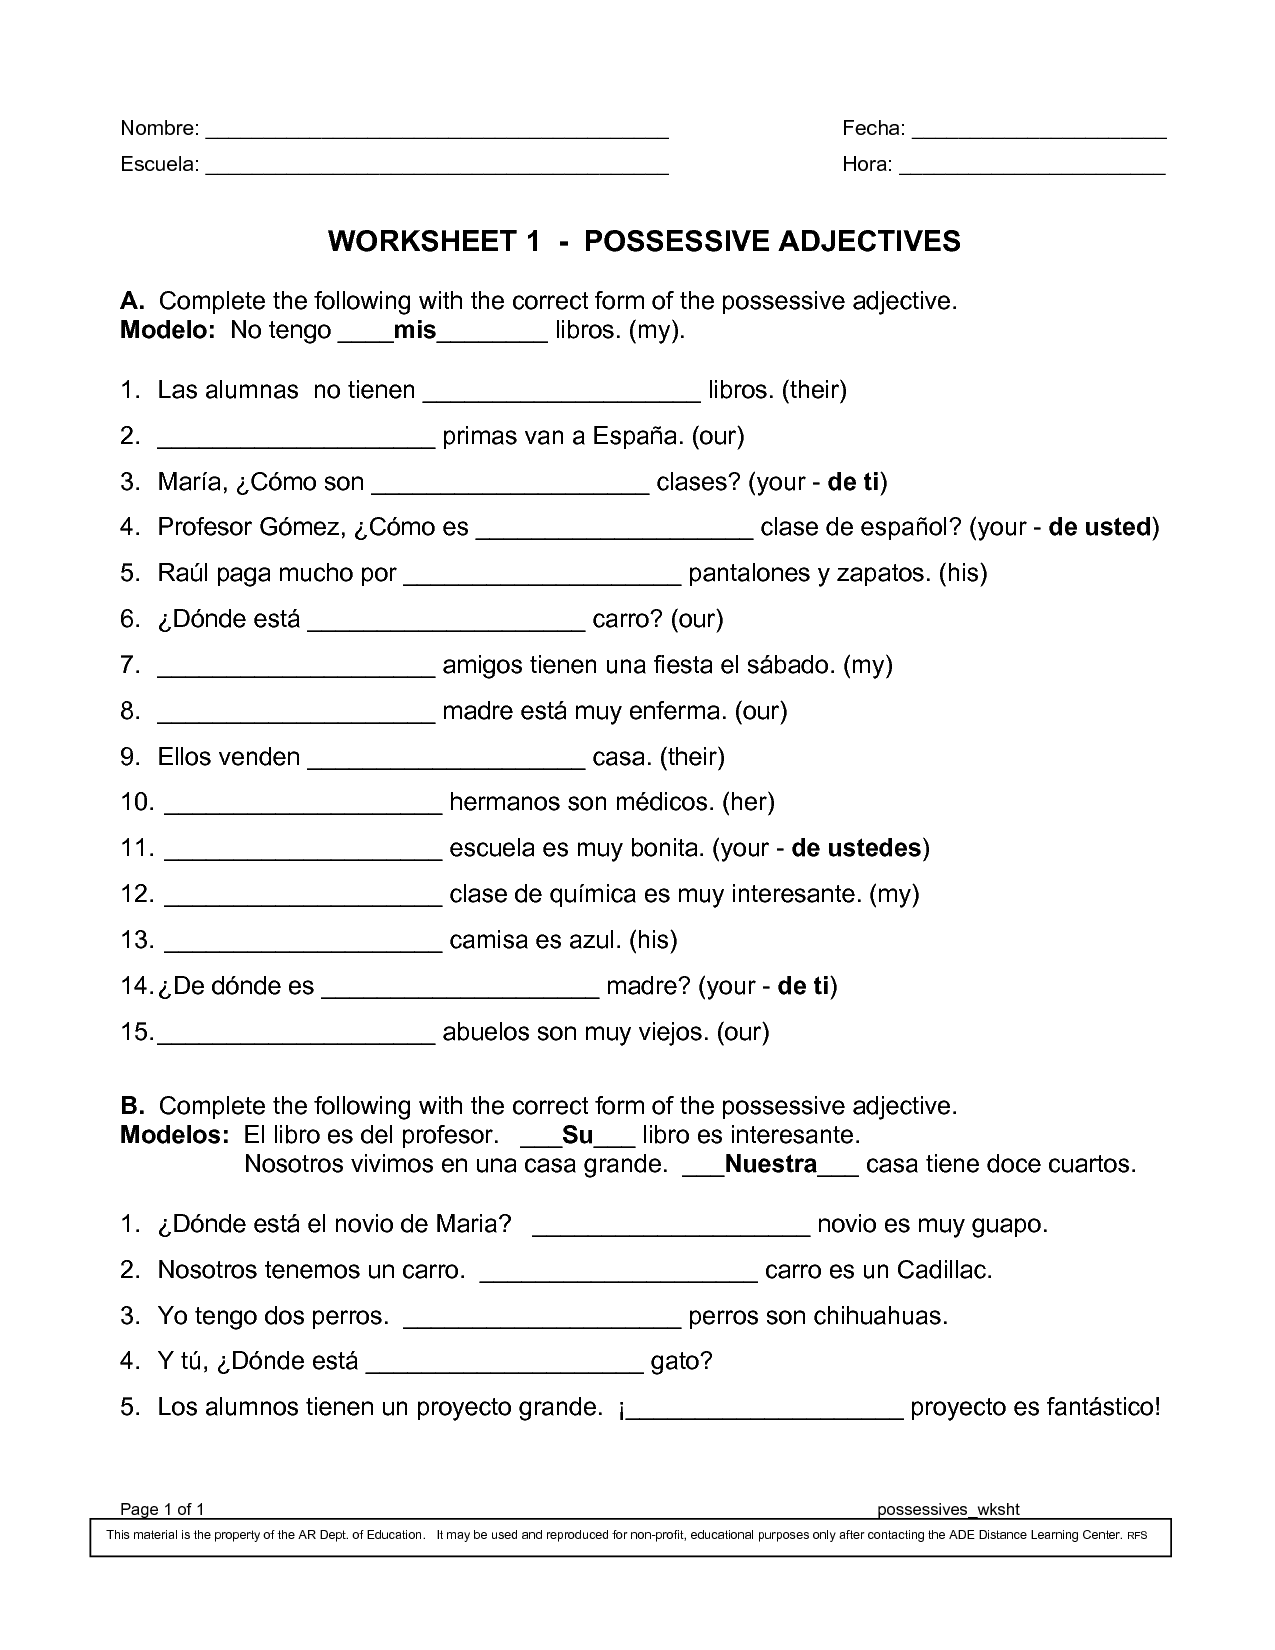 14-best-images-of-possessive-pronouns-adjectives-worksheets-spanish-possessive-adjectives